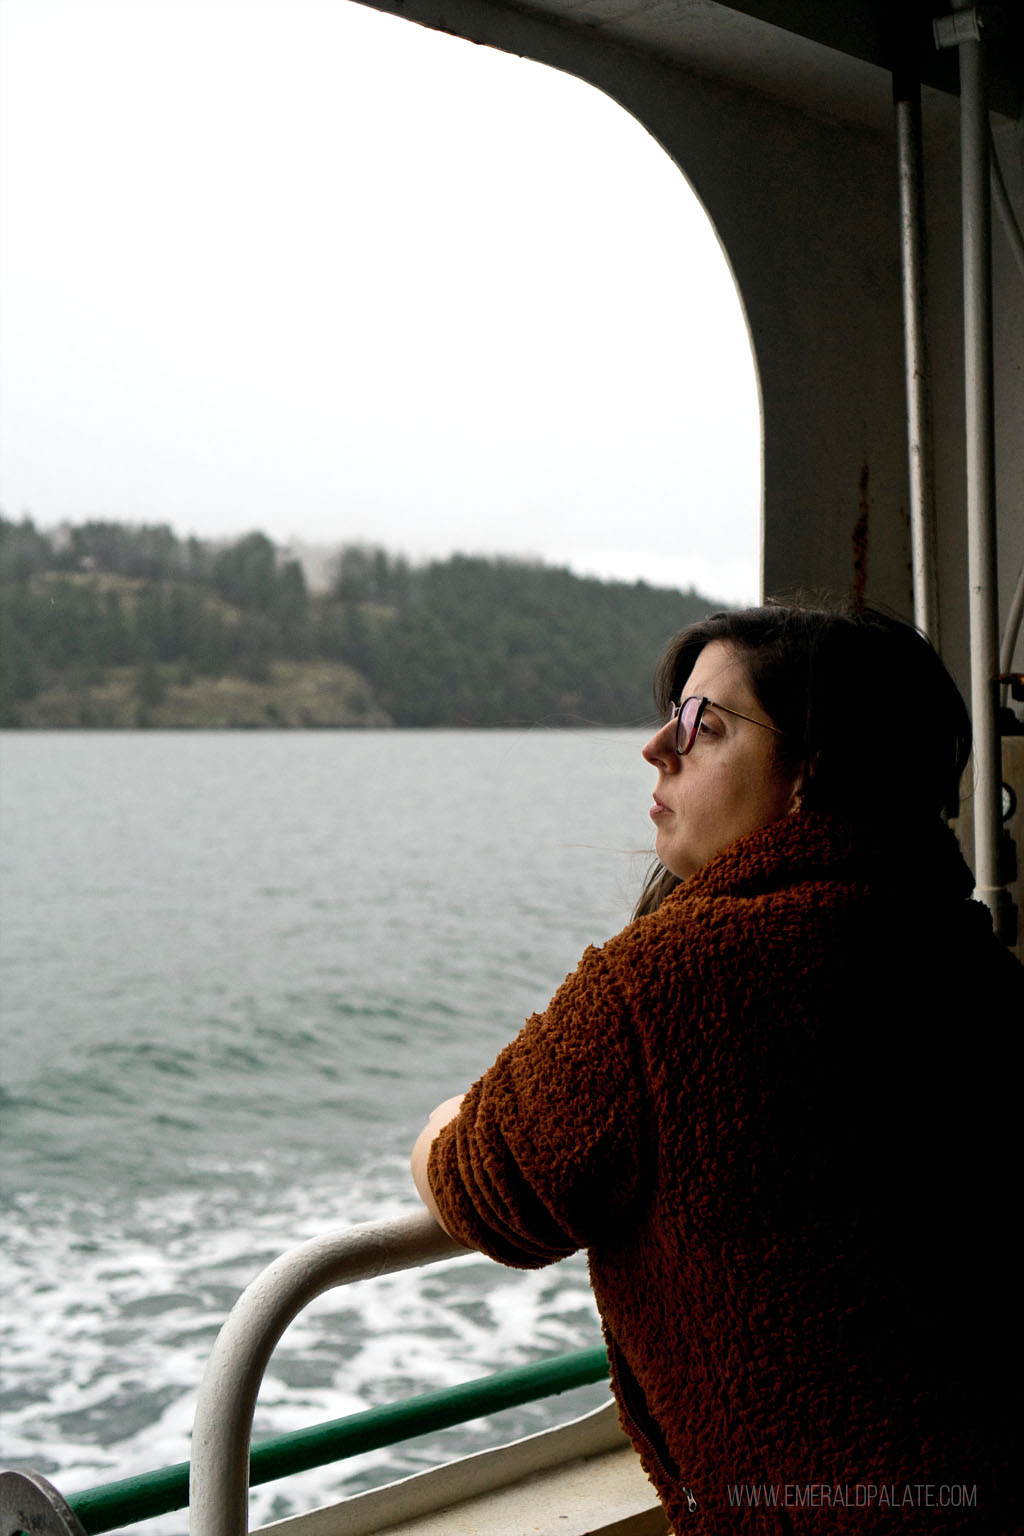 Day Trip to Orcas Island from Seattle